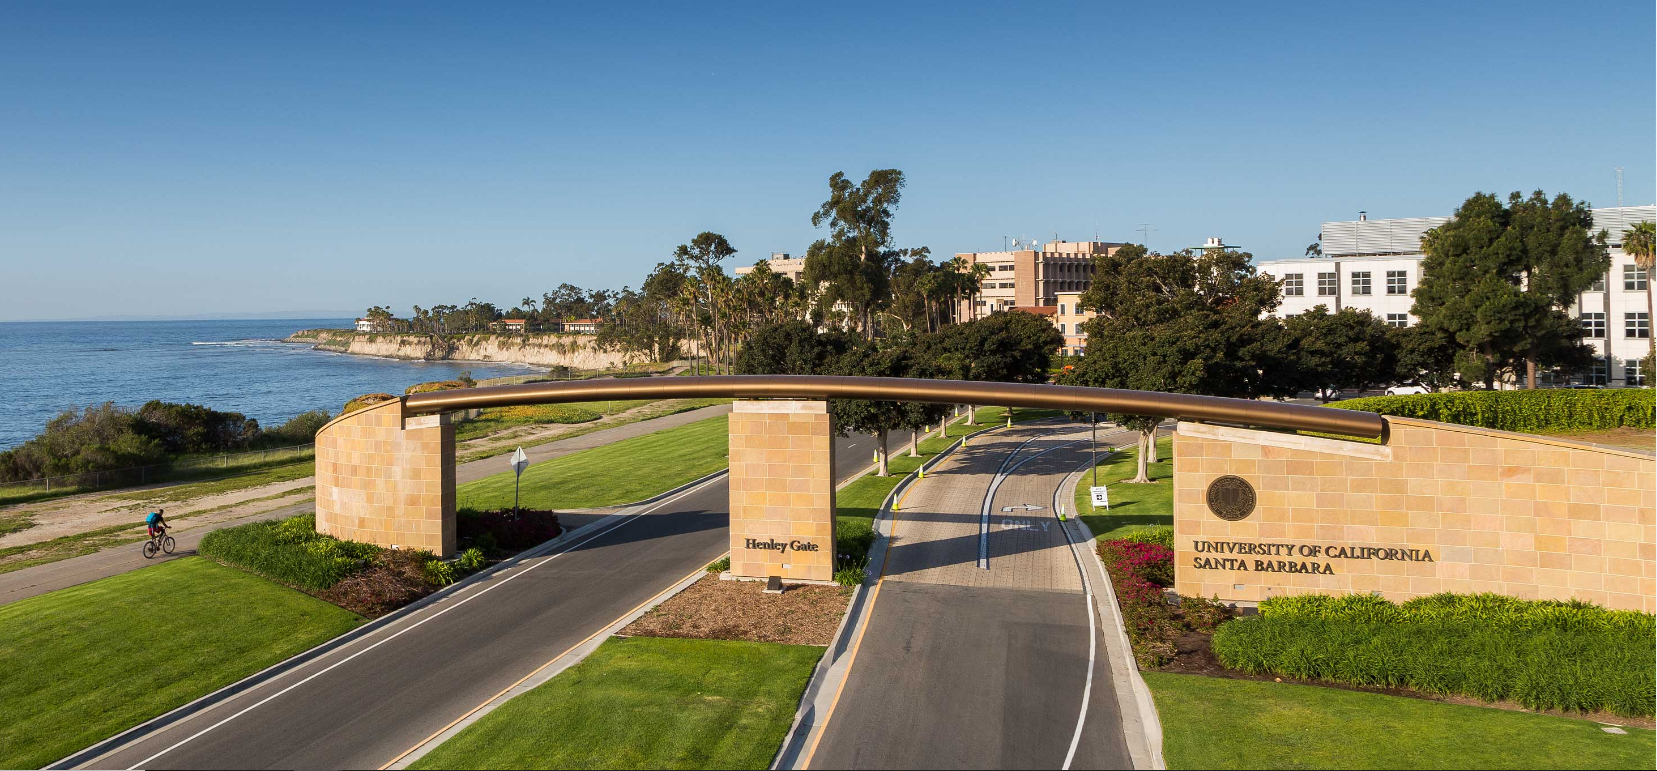 Henley Gate entrance to UCSB campus